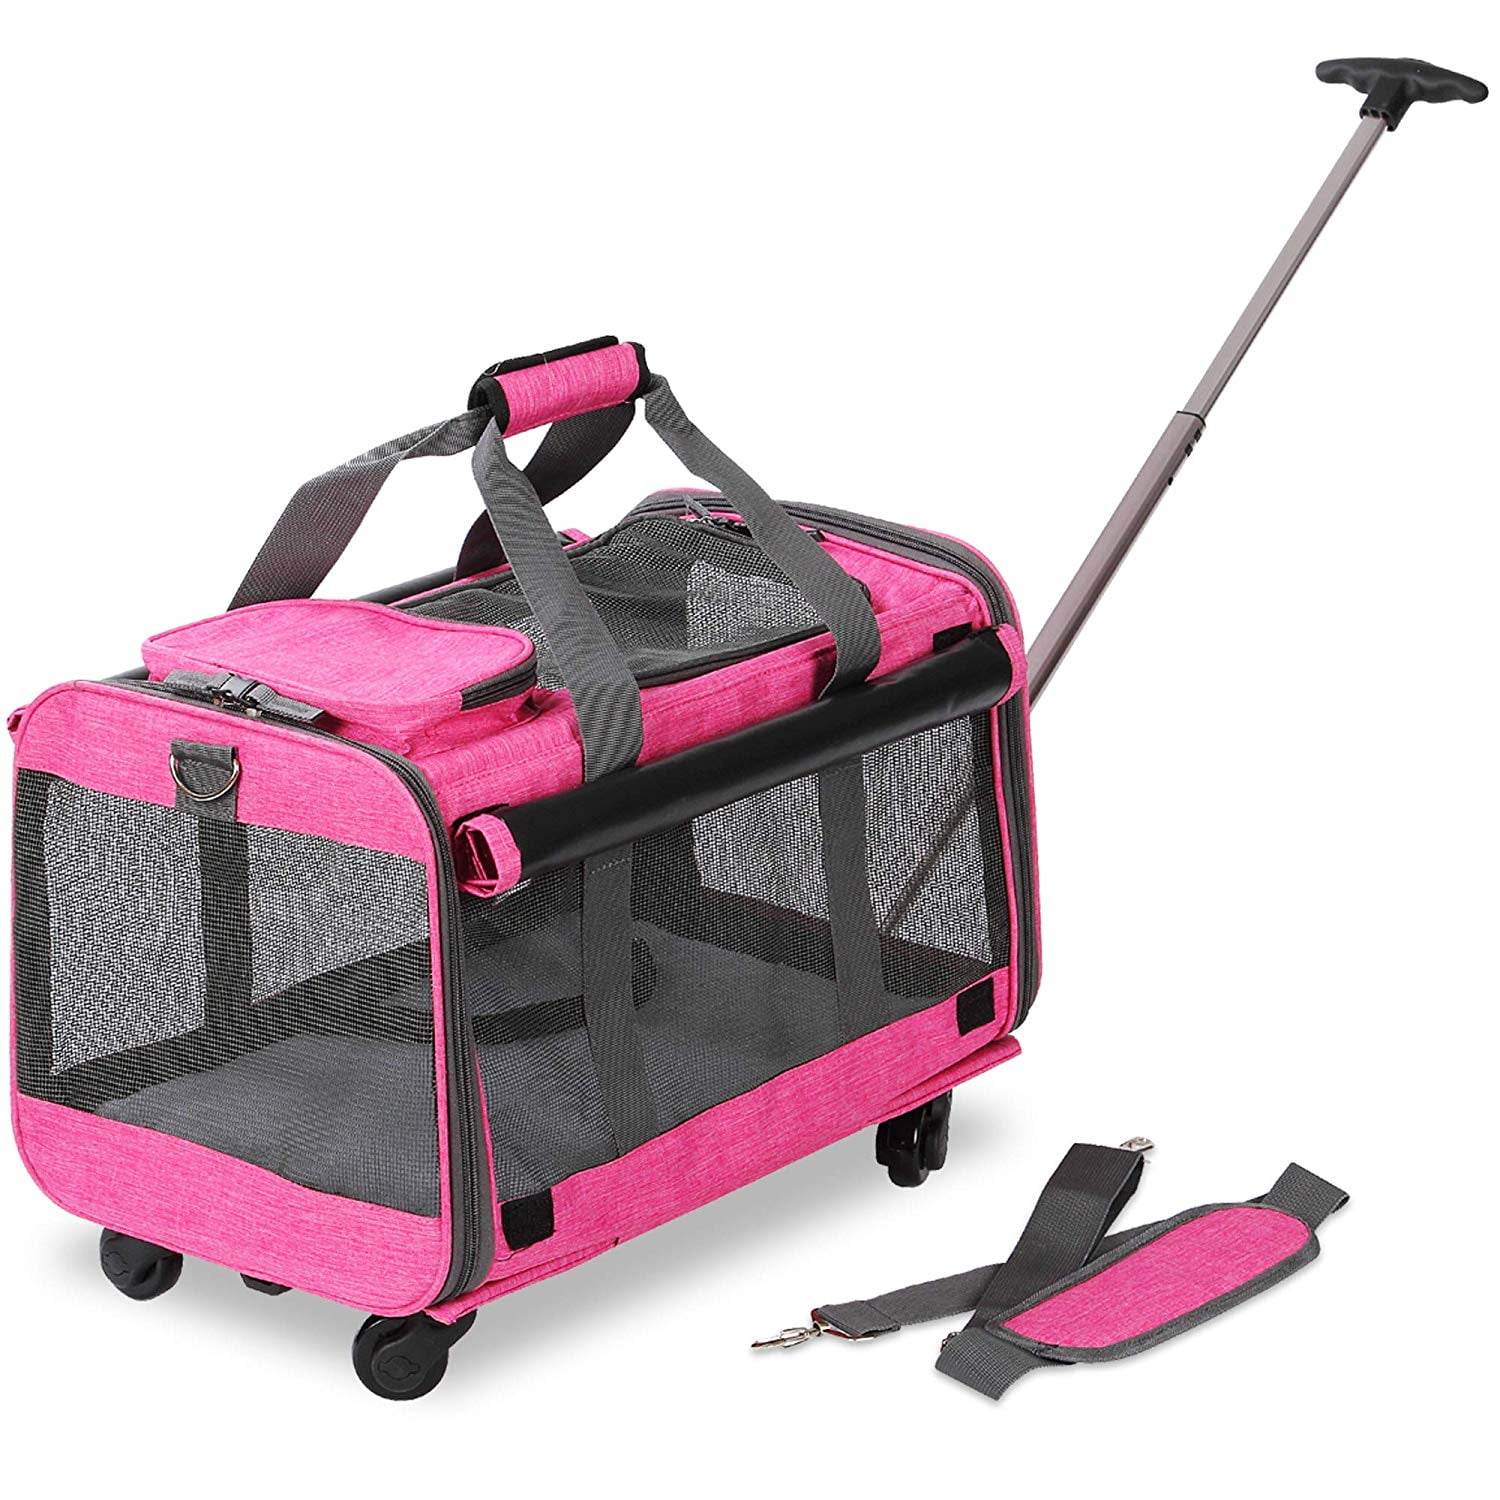 Heather Pink KOPEKS Pet Carrier with Detachable Wheels for Small and Medium Dogs & Cats